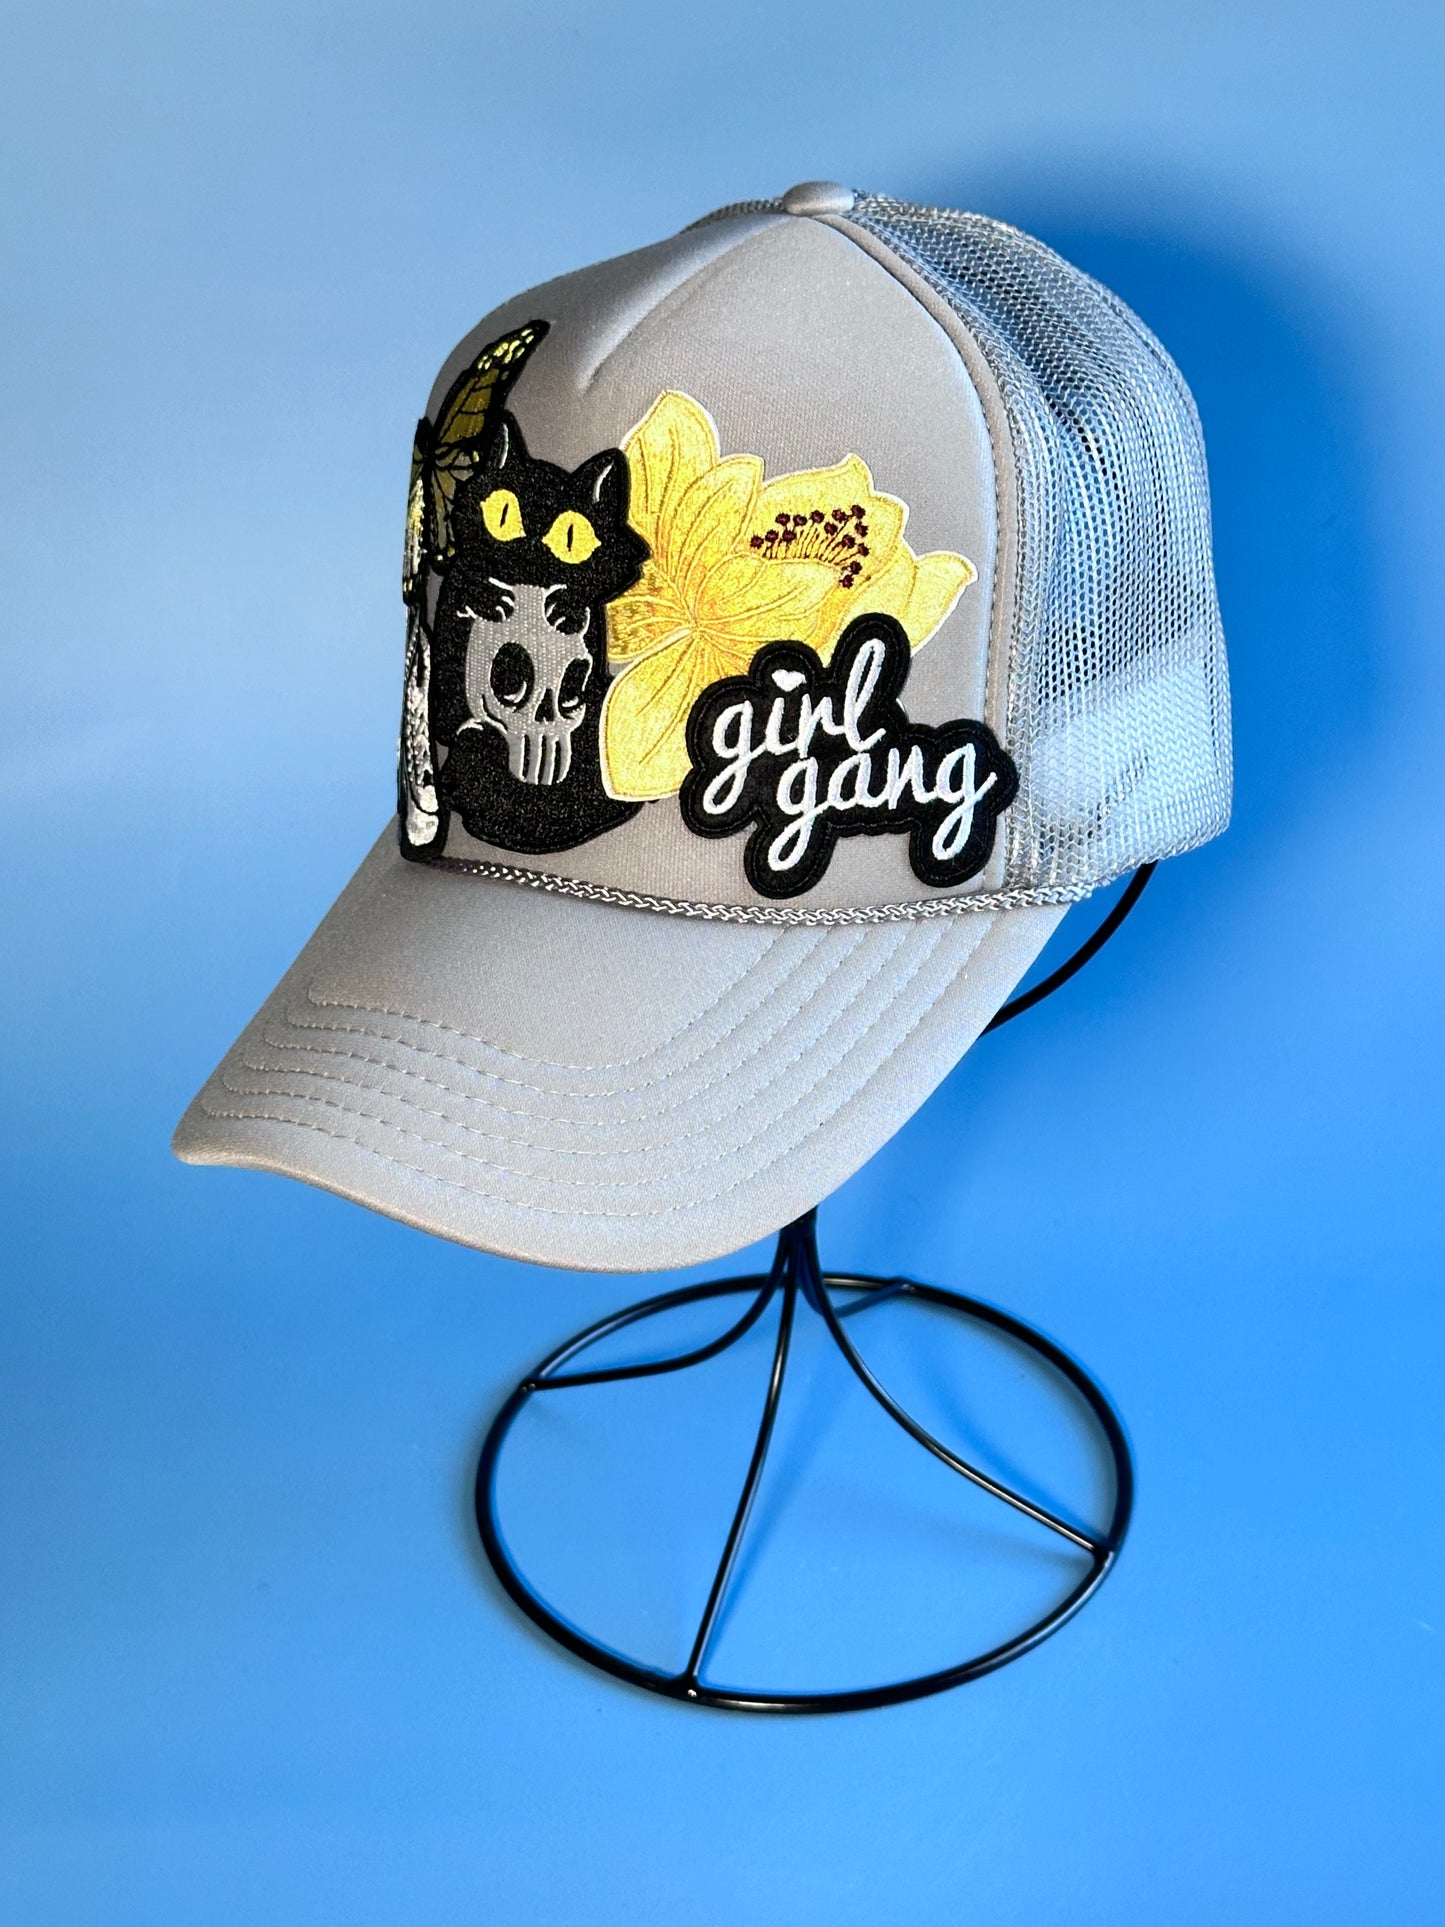 Edgy Grey, Black and Yellow Girl Gang Happy Soul Trucker Hat